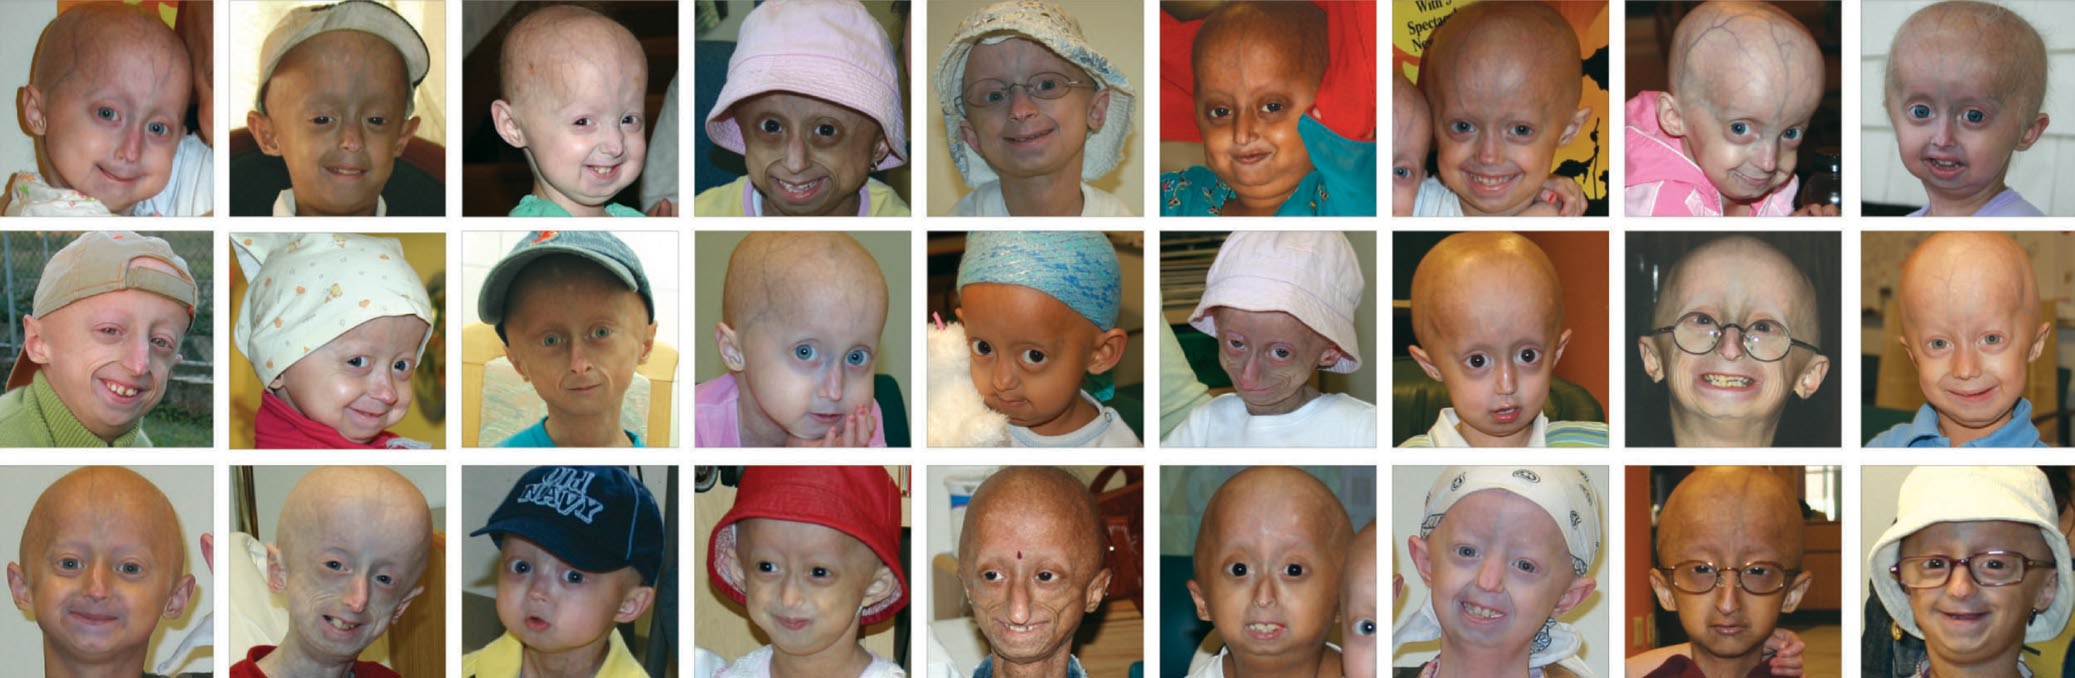 Pictures of 27 children with Progeria